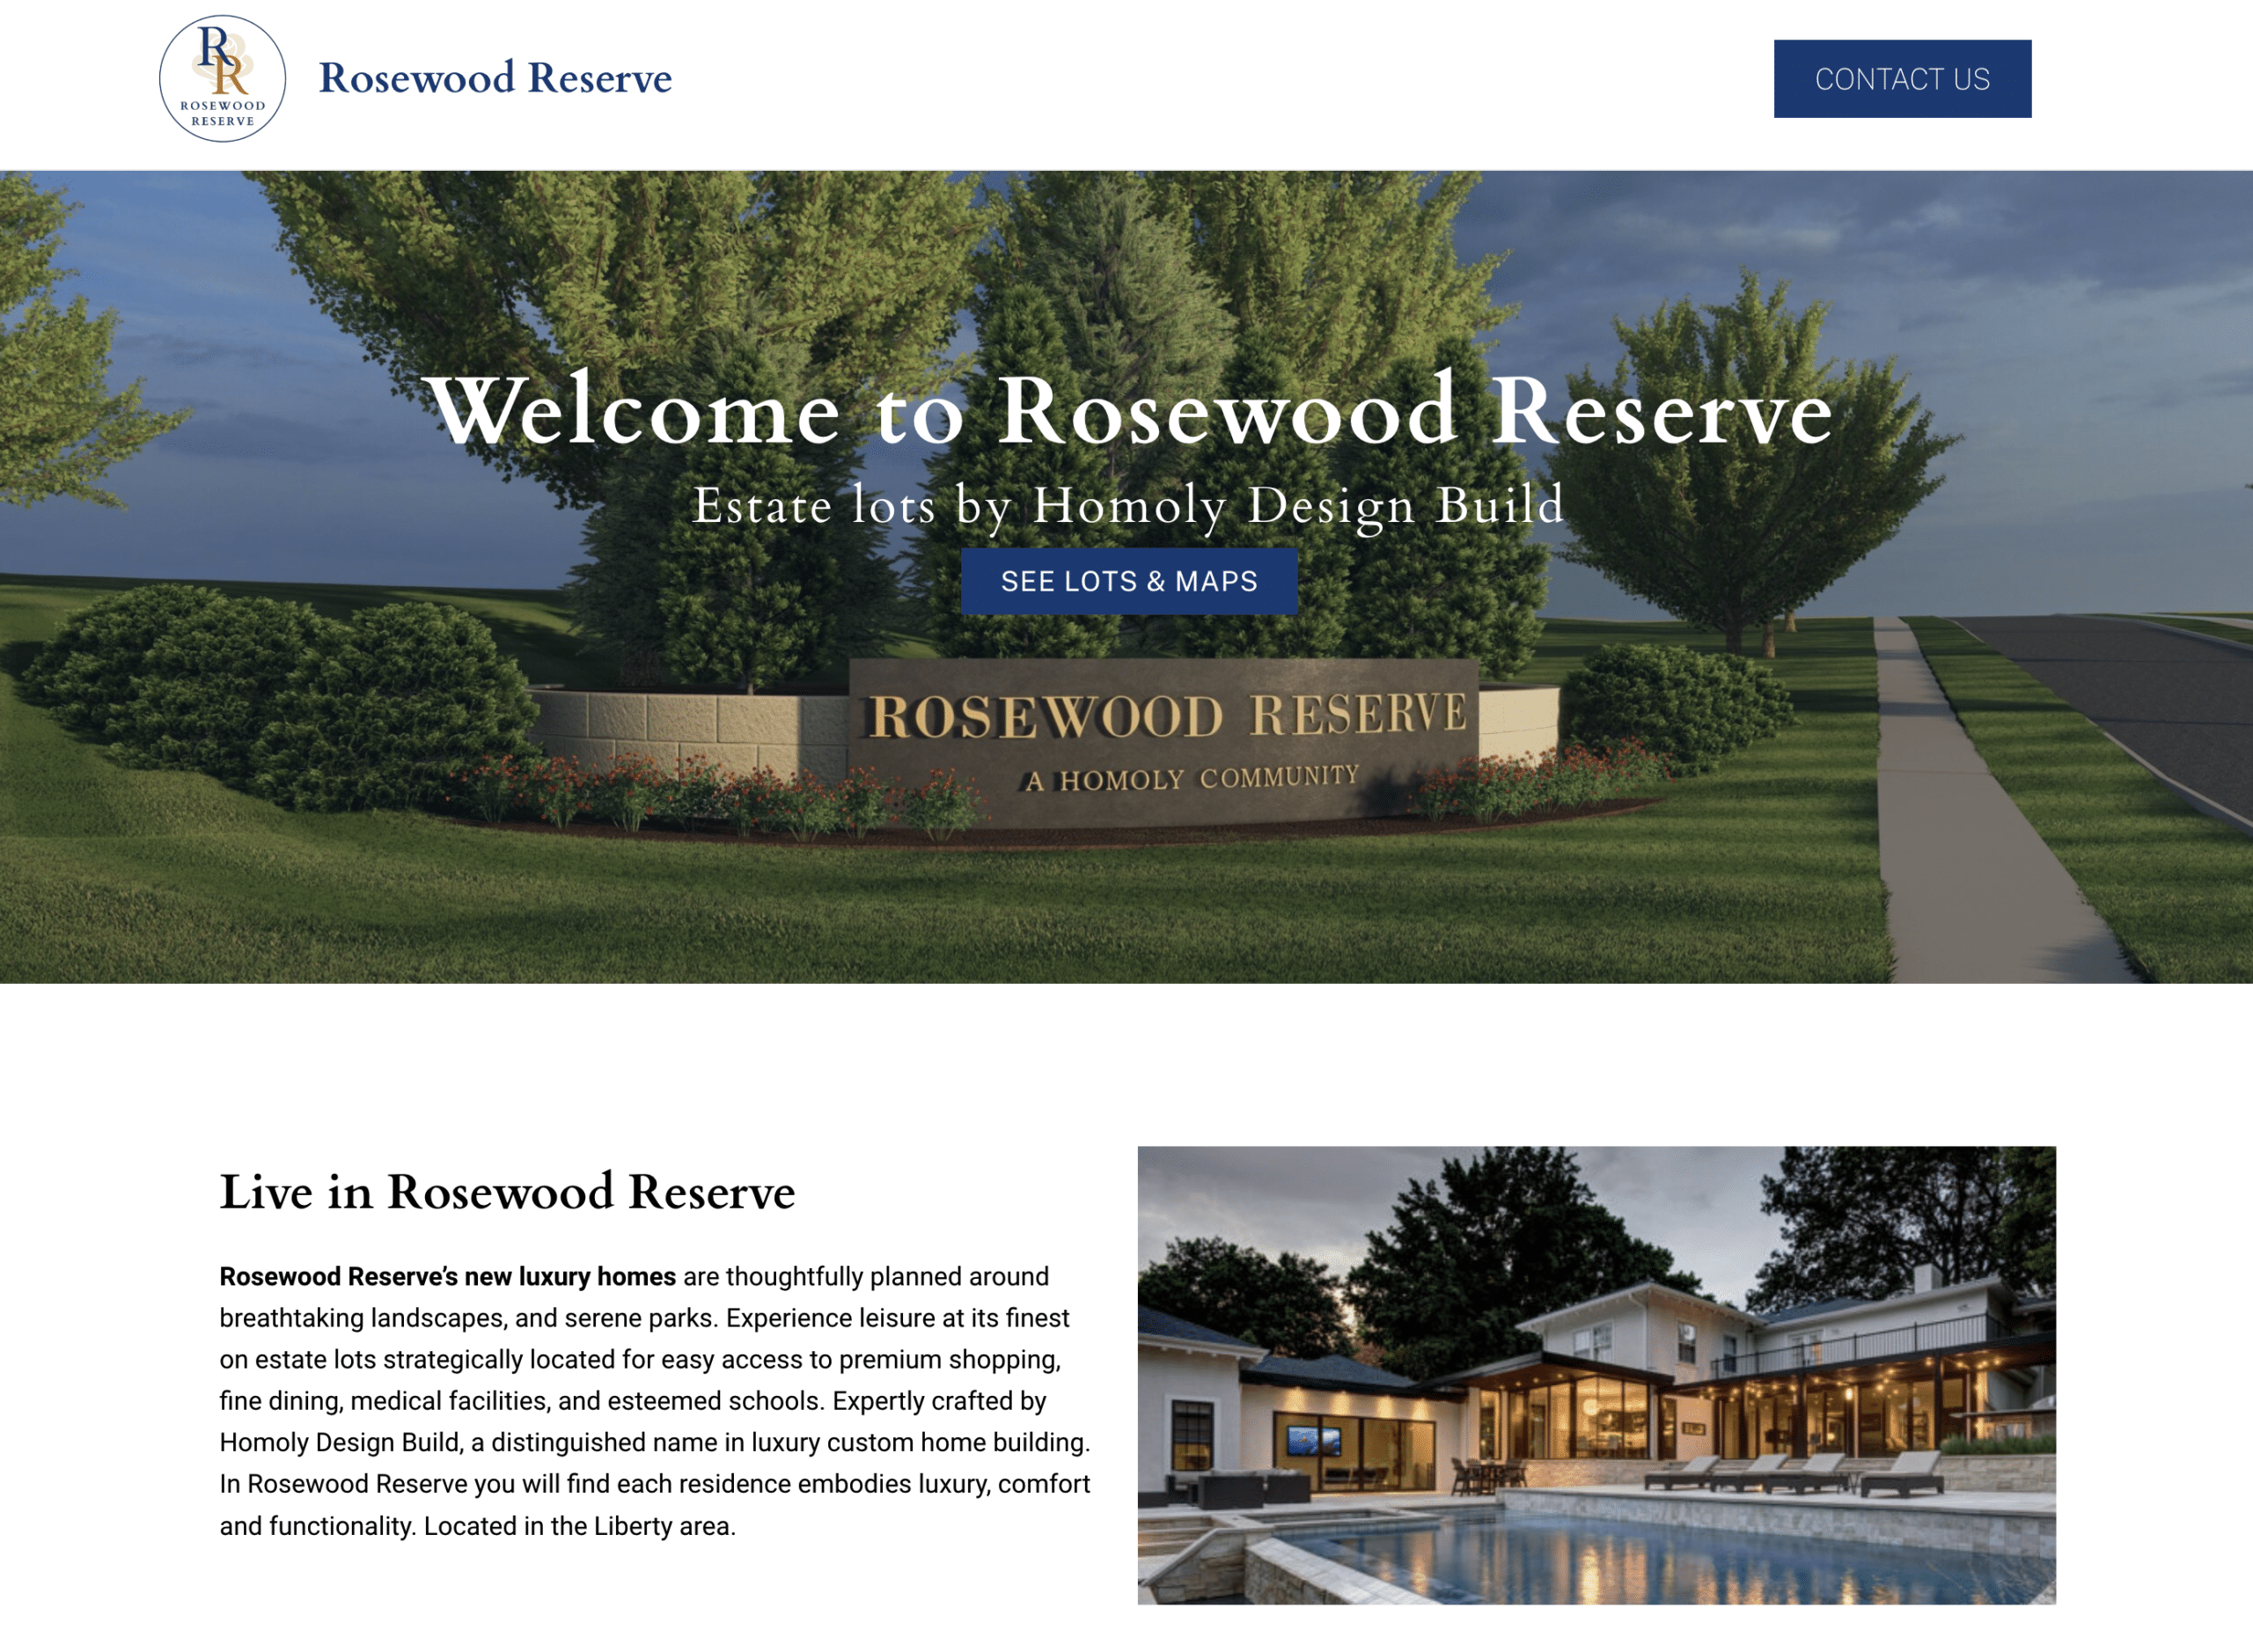 Landing page for Homoly Construction's newest custom-built home development, Rosewood Reserve